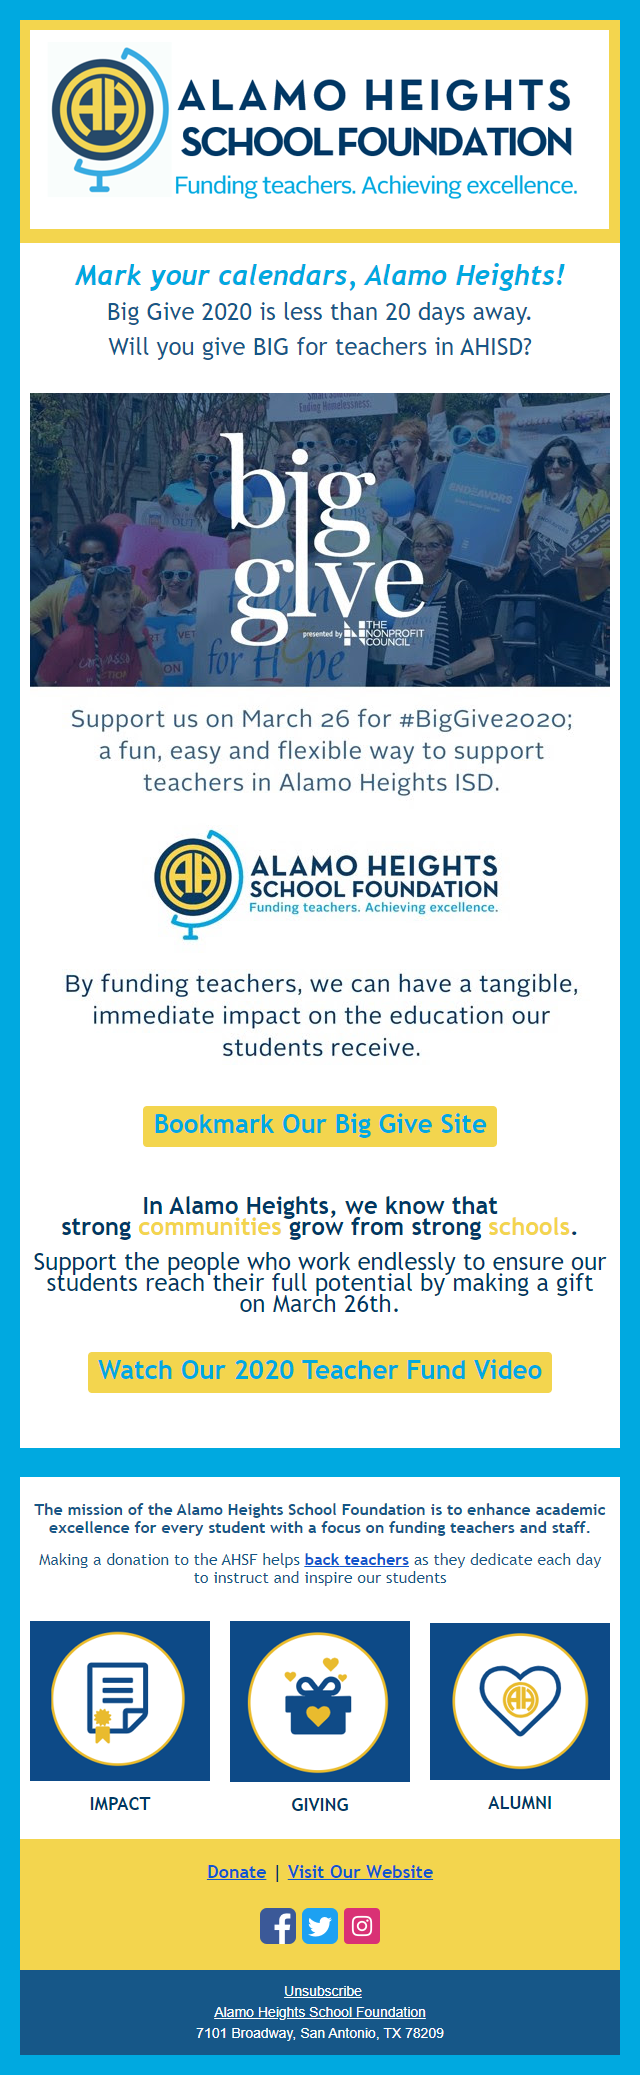 Heights happenings March 2020